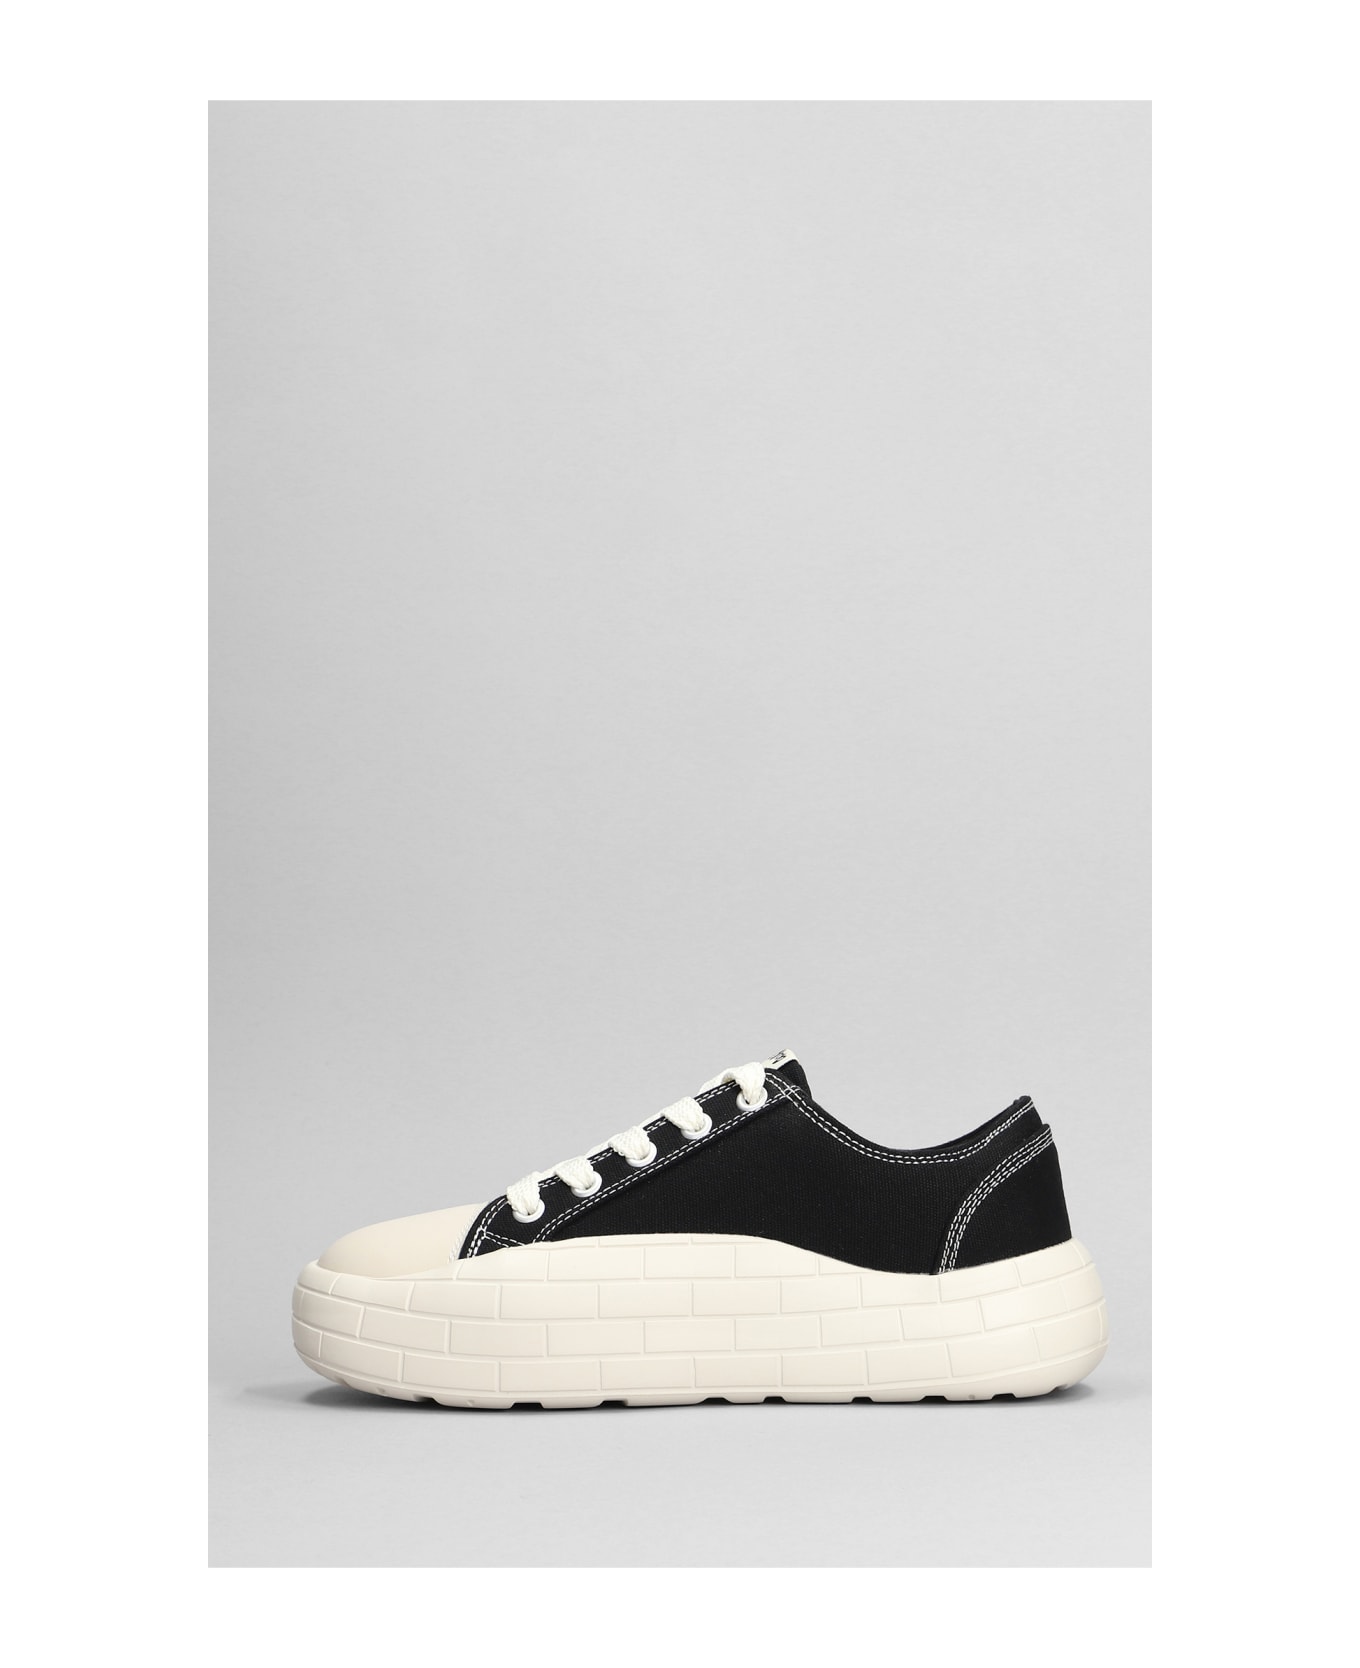 Acupuncture Nyu Vulc G2 Sneakers In Black Canvas - black スニーカー